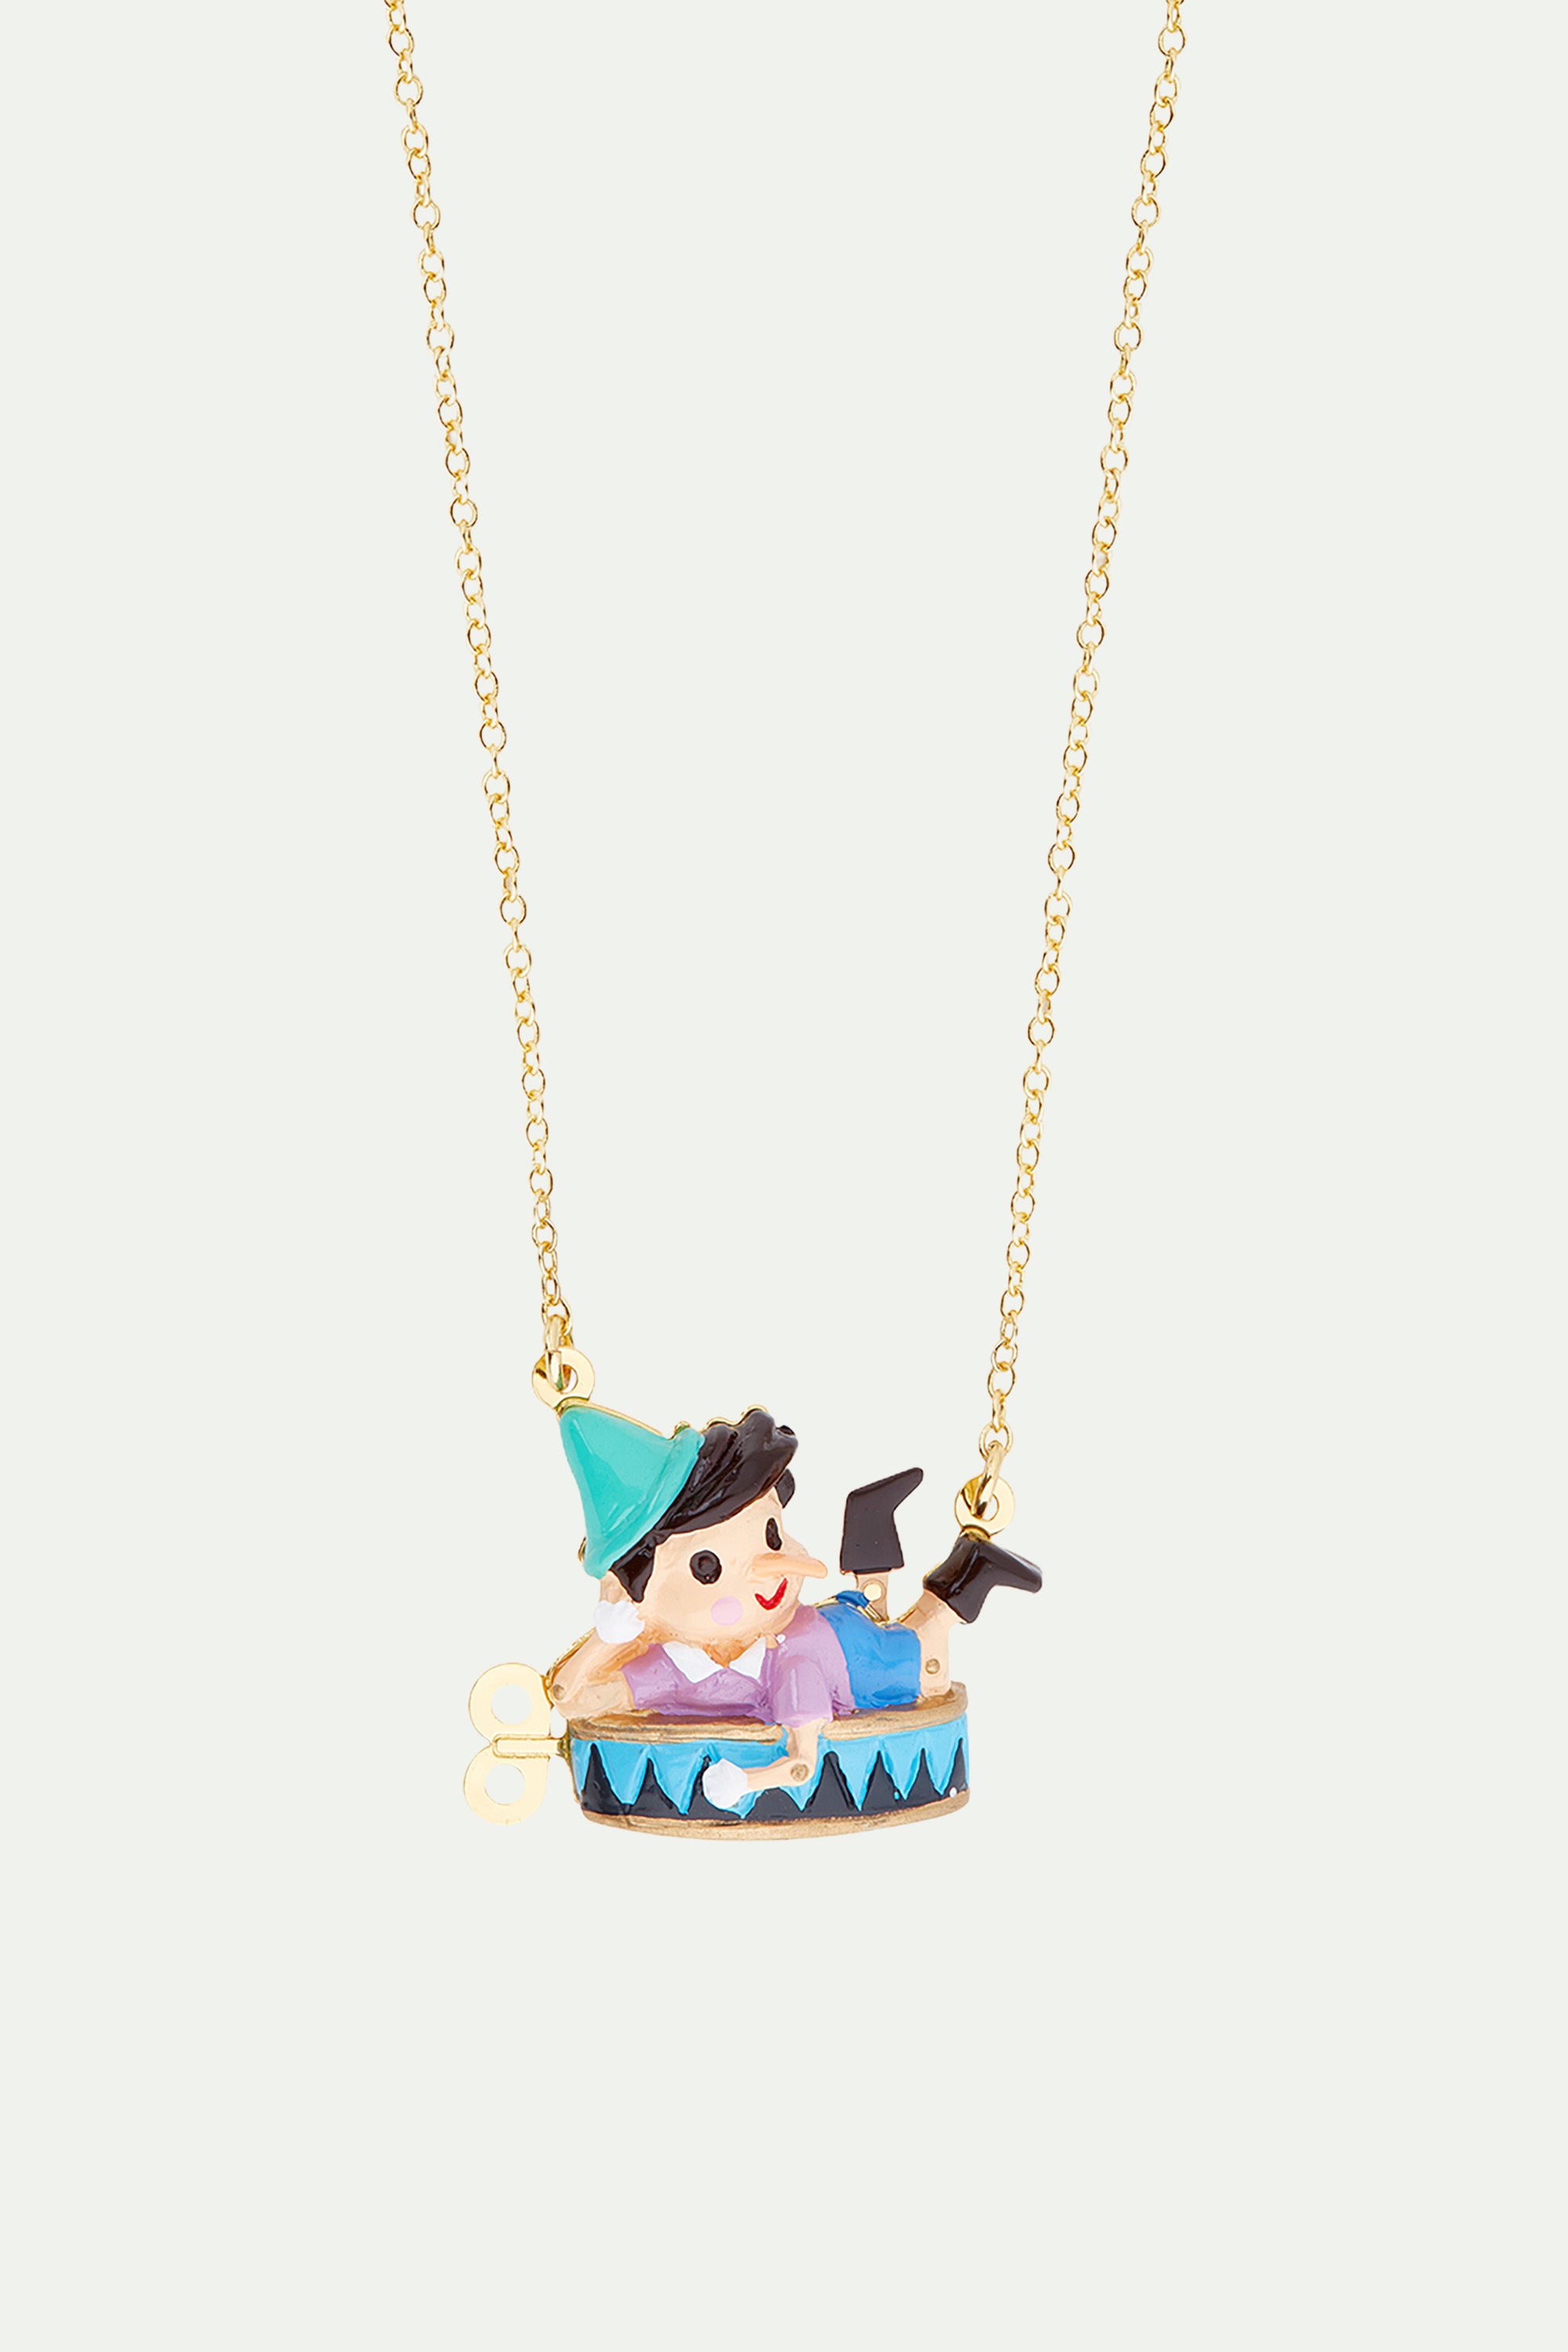 Pinocchio and circus tent necklace